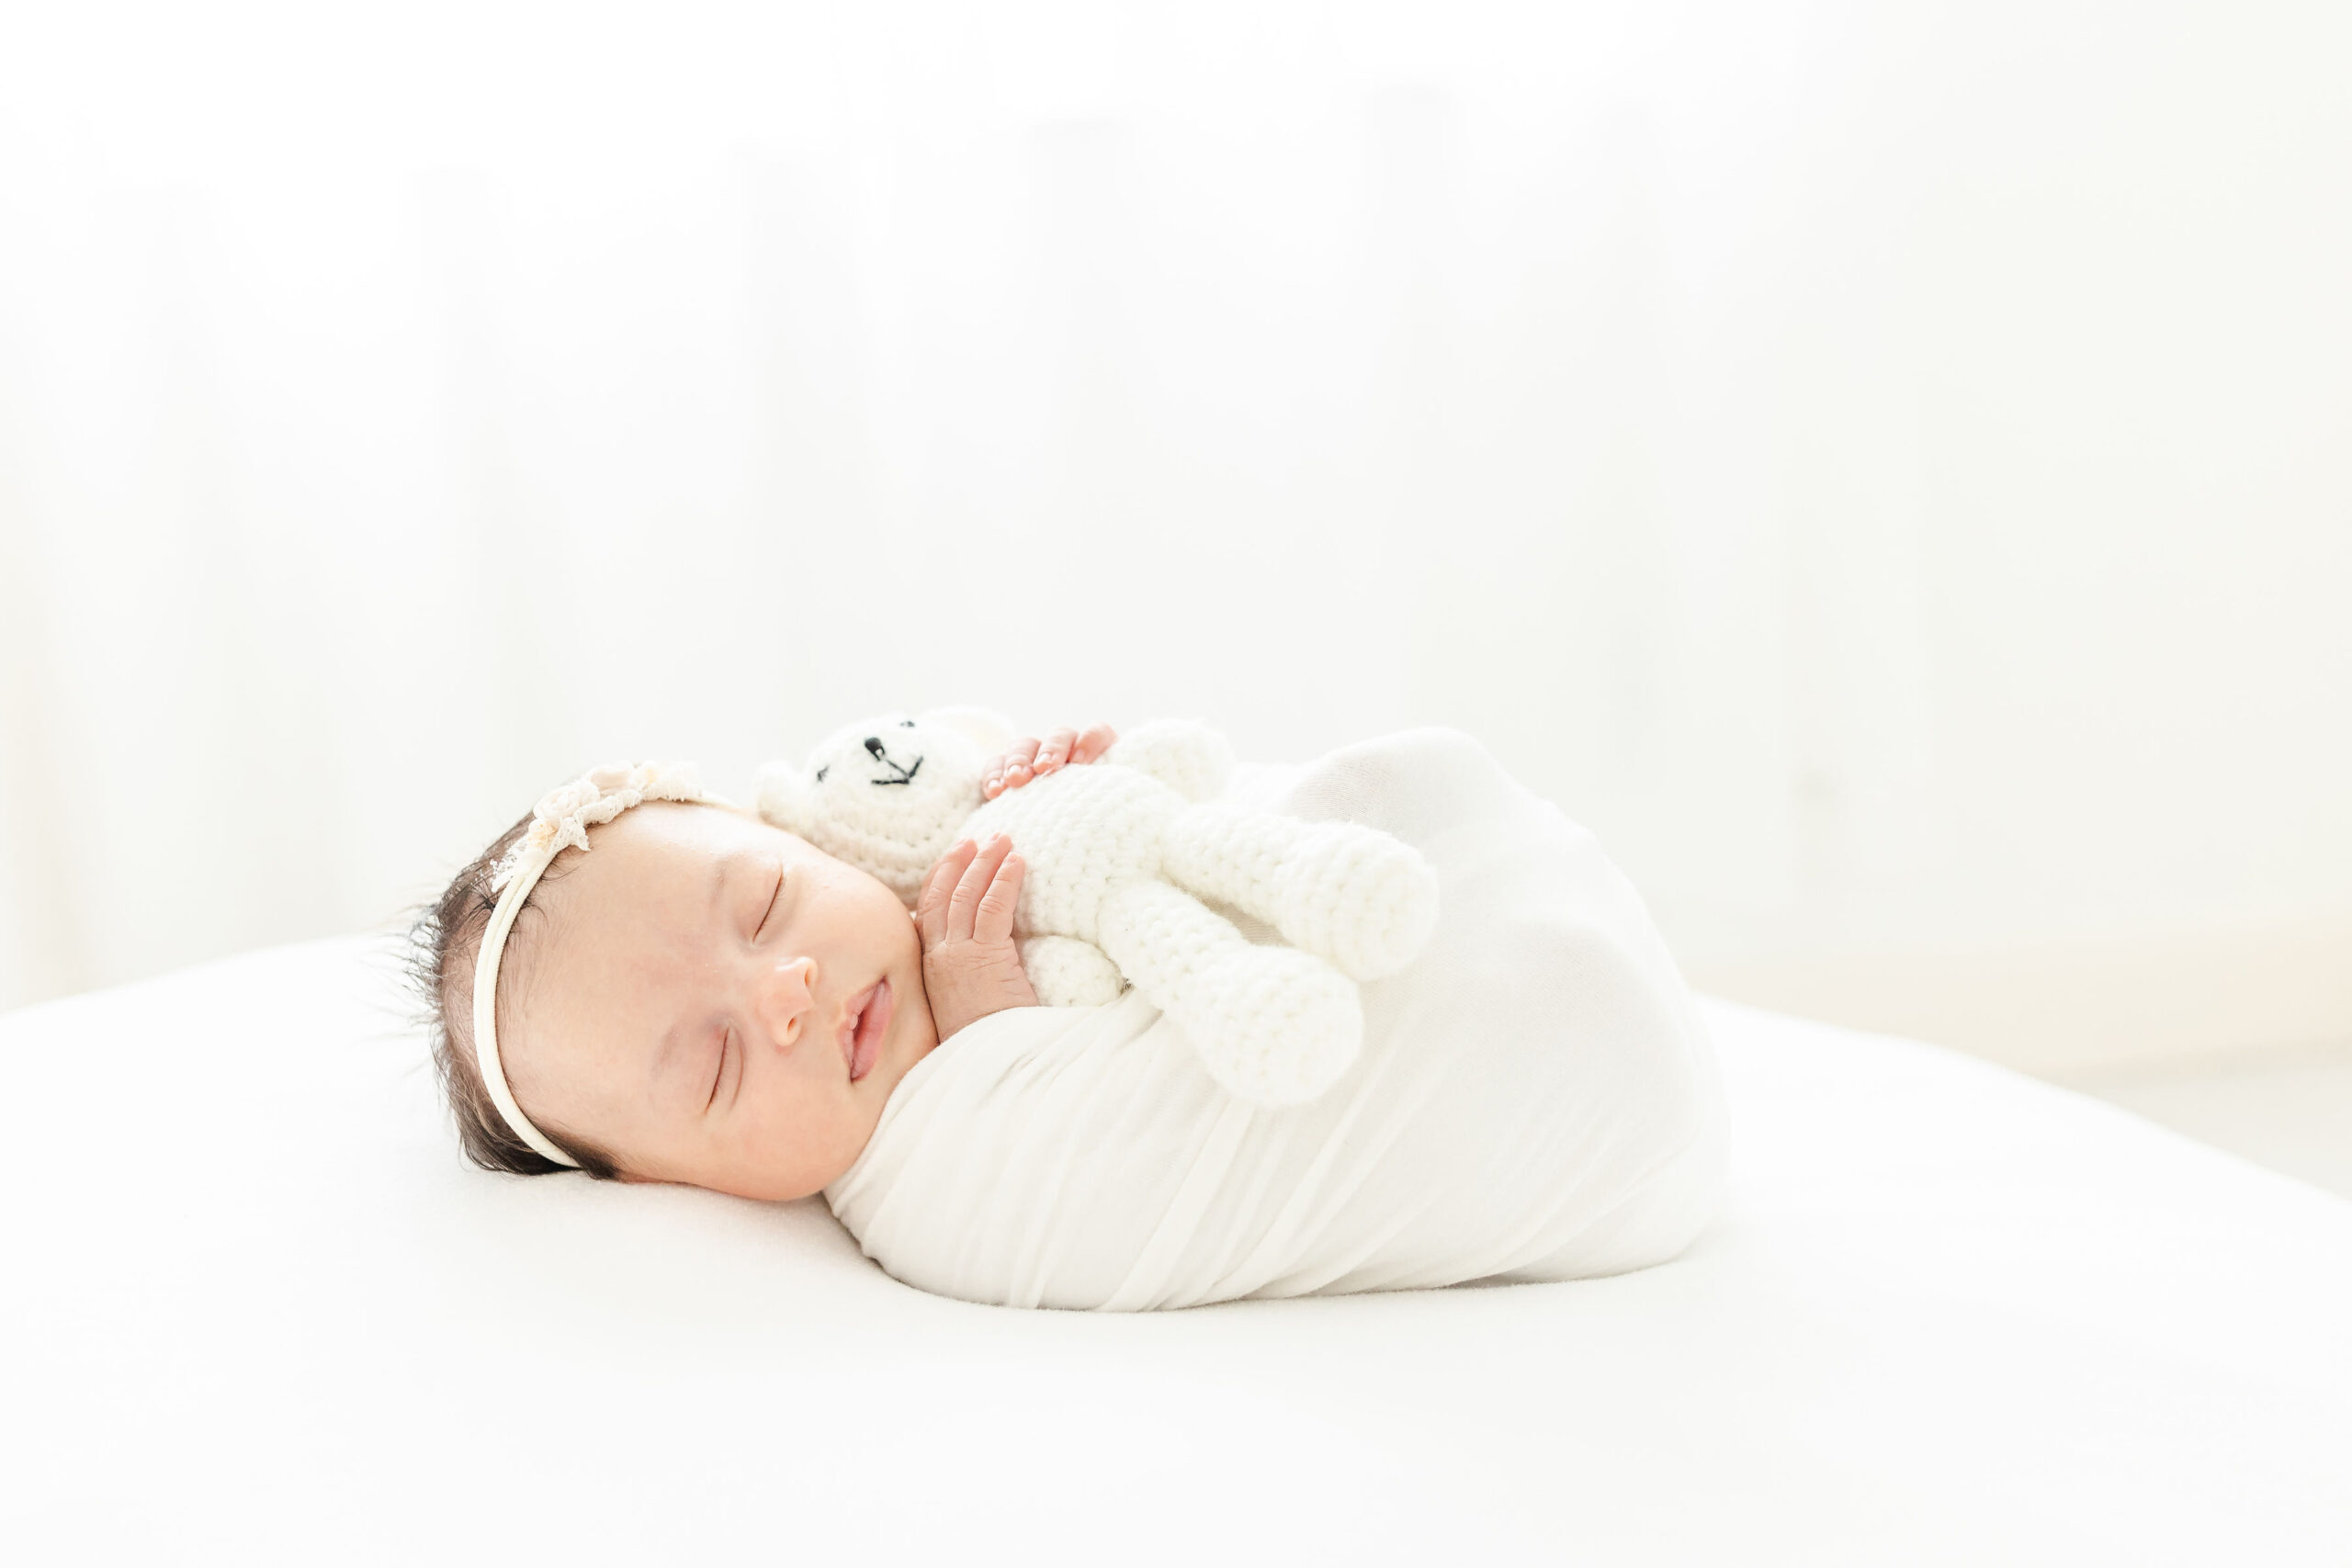 A newborn baby cuddles with a knit teddy bear while sleeping in a white swaddle on a bed under the window